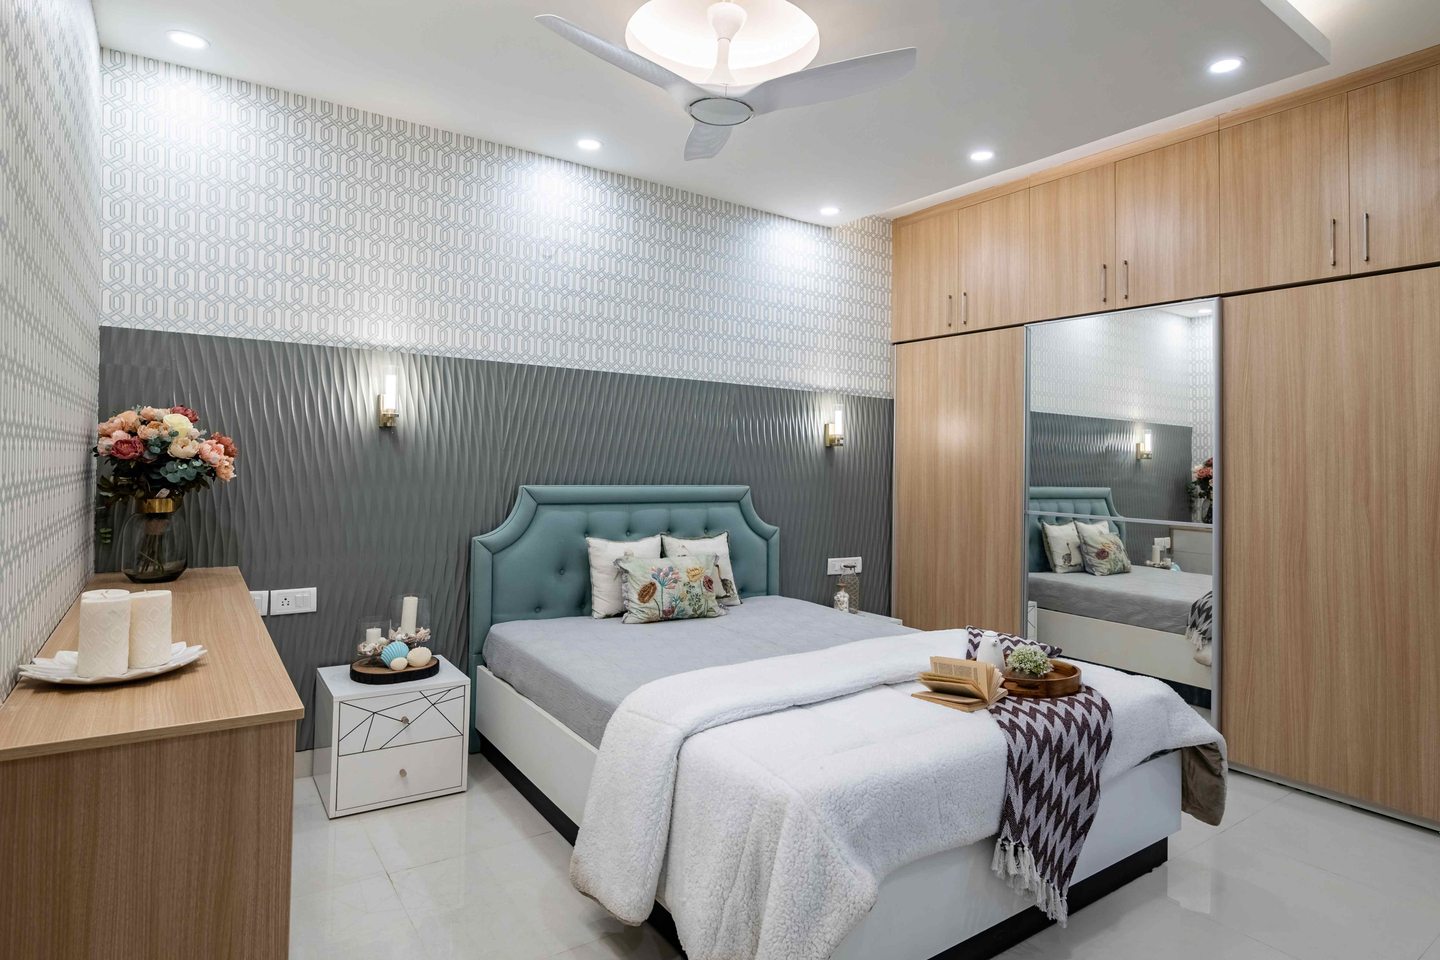 Bedroom Design With A Double Bed And White Side Tables - Livspace